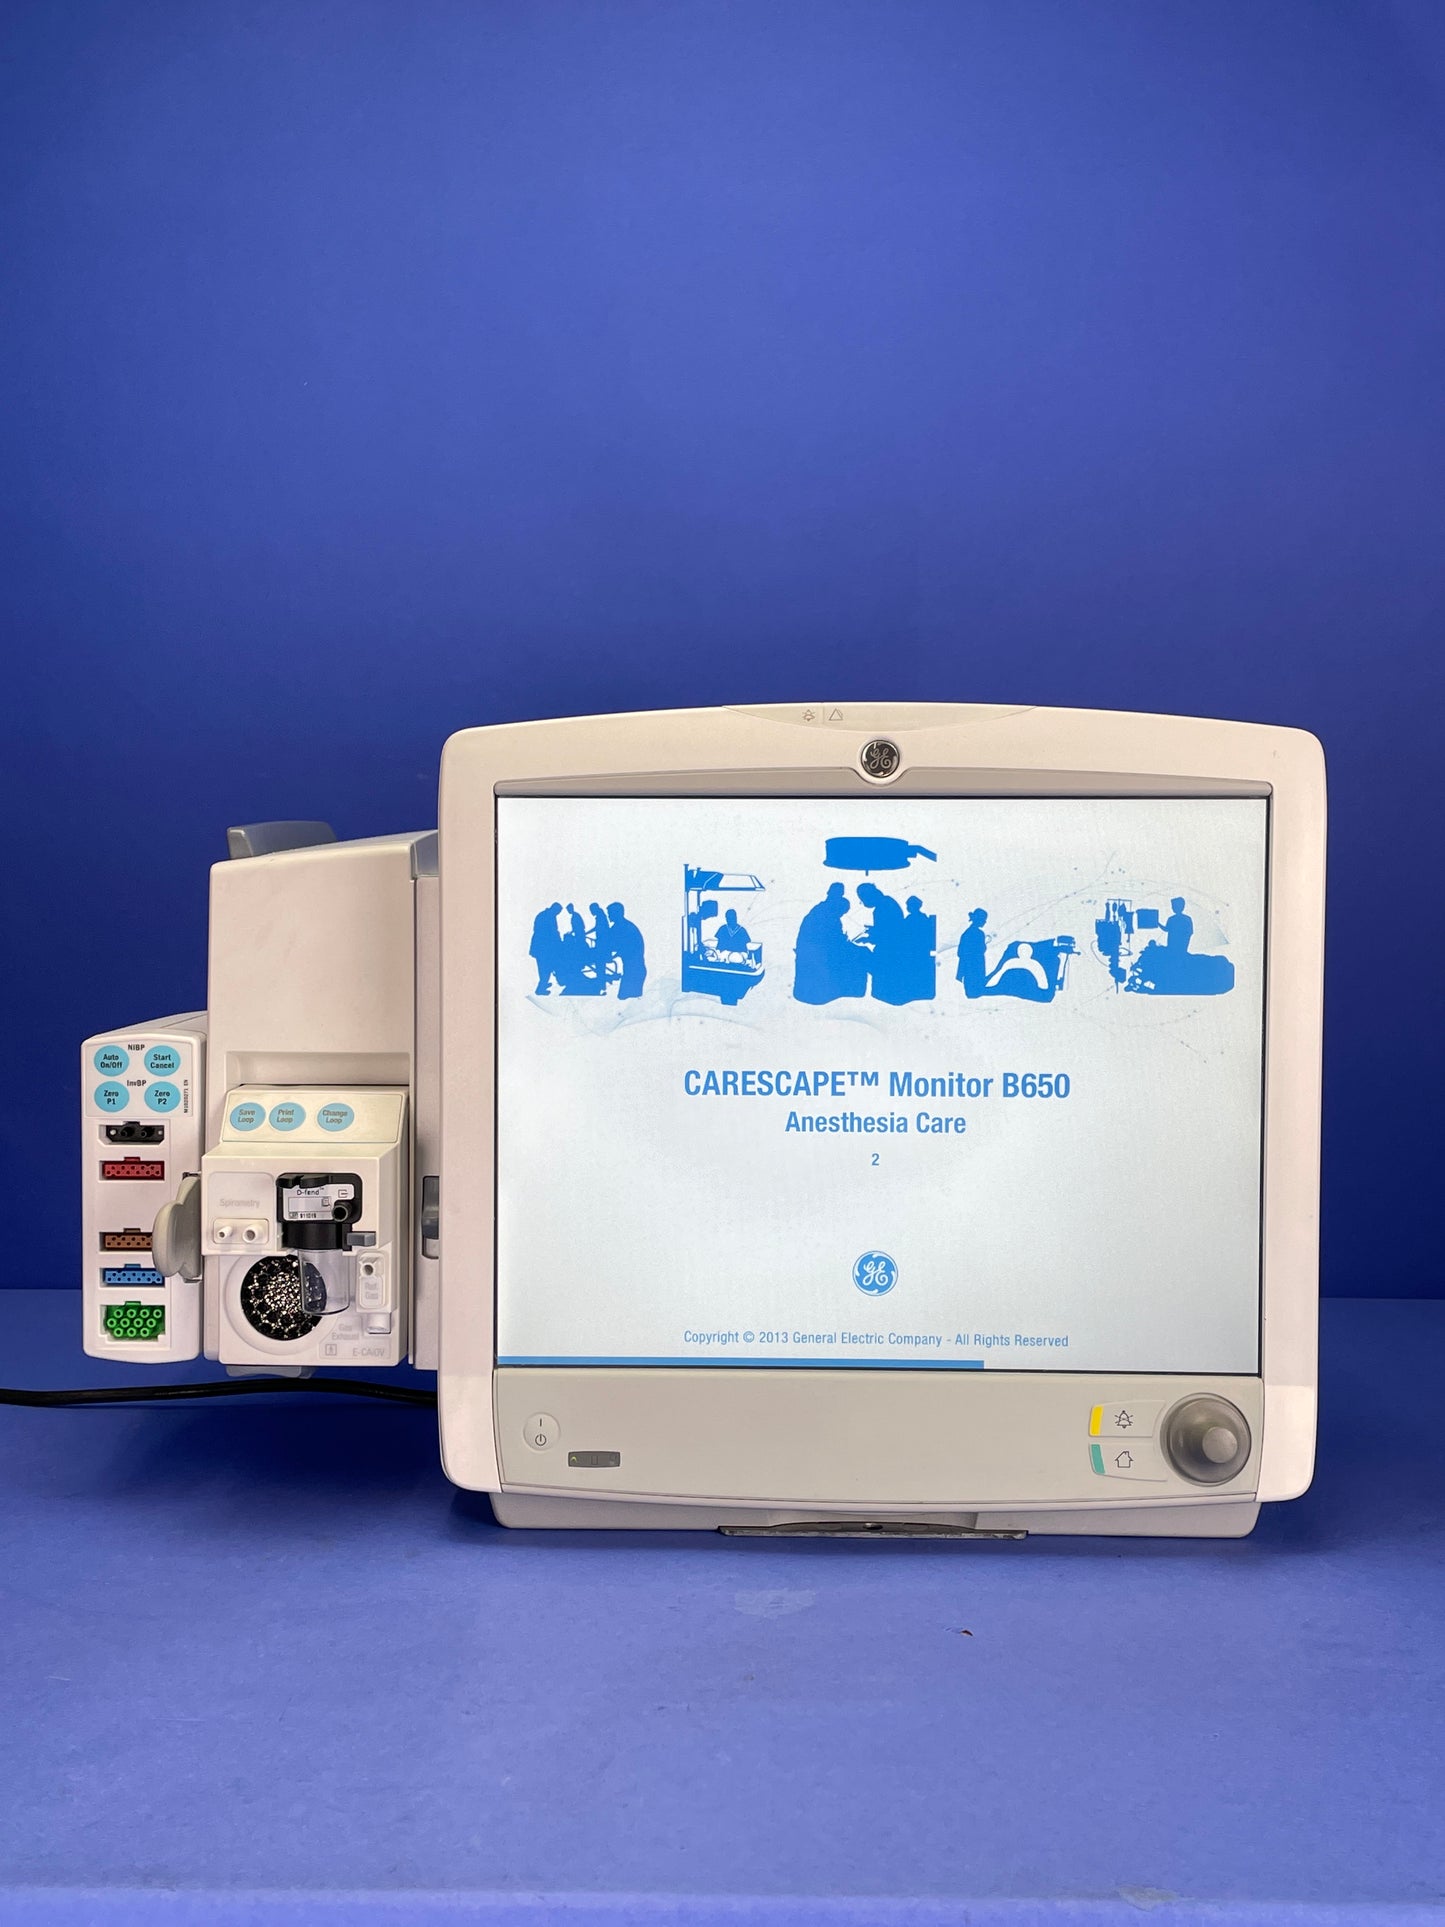 GE Carescape anaesthesia monitor powering up with attached CO2 and Vital signs modules